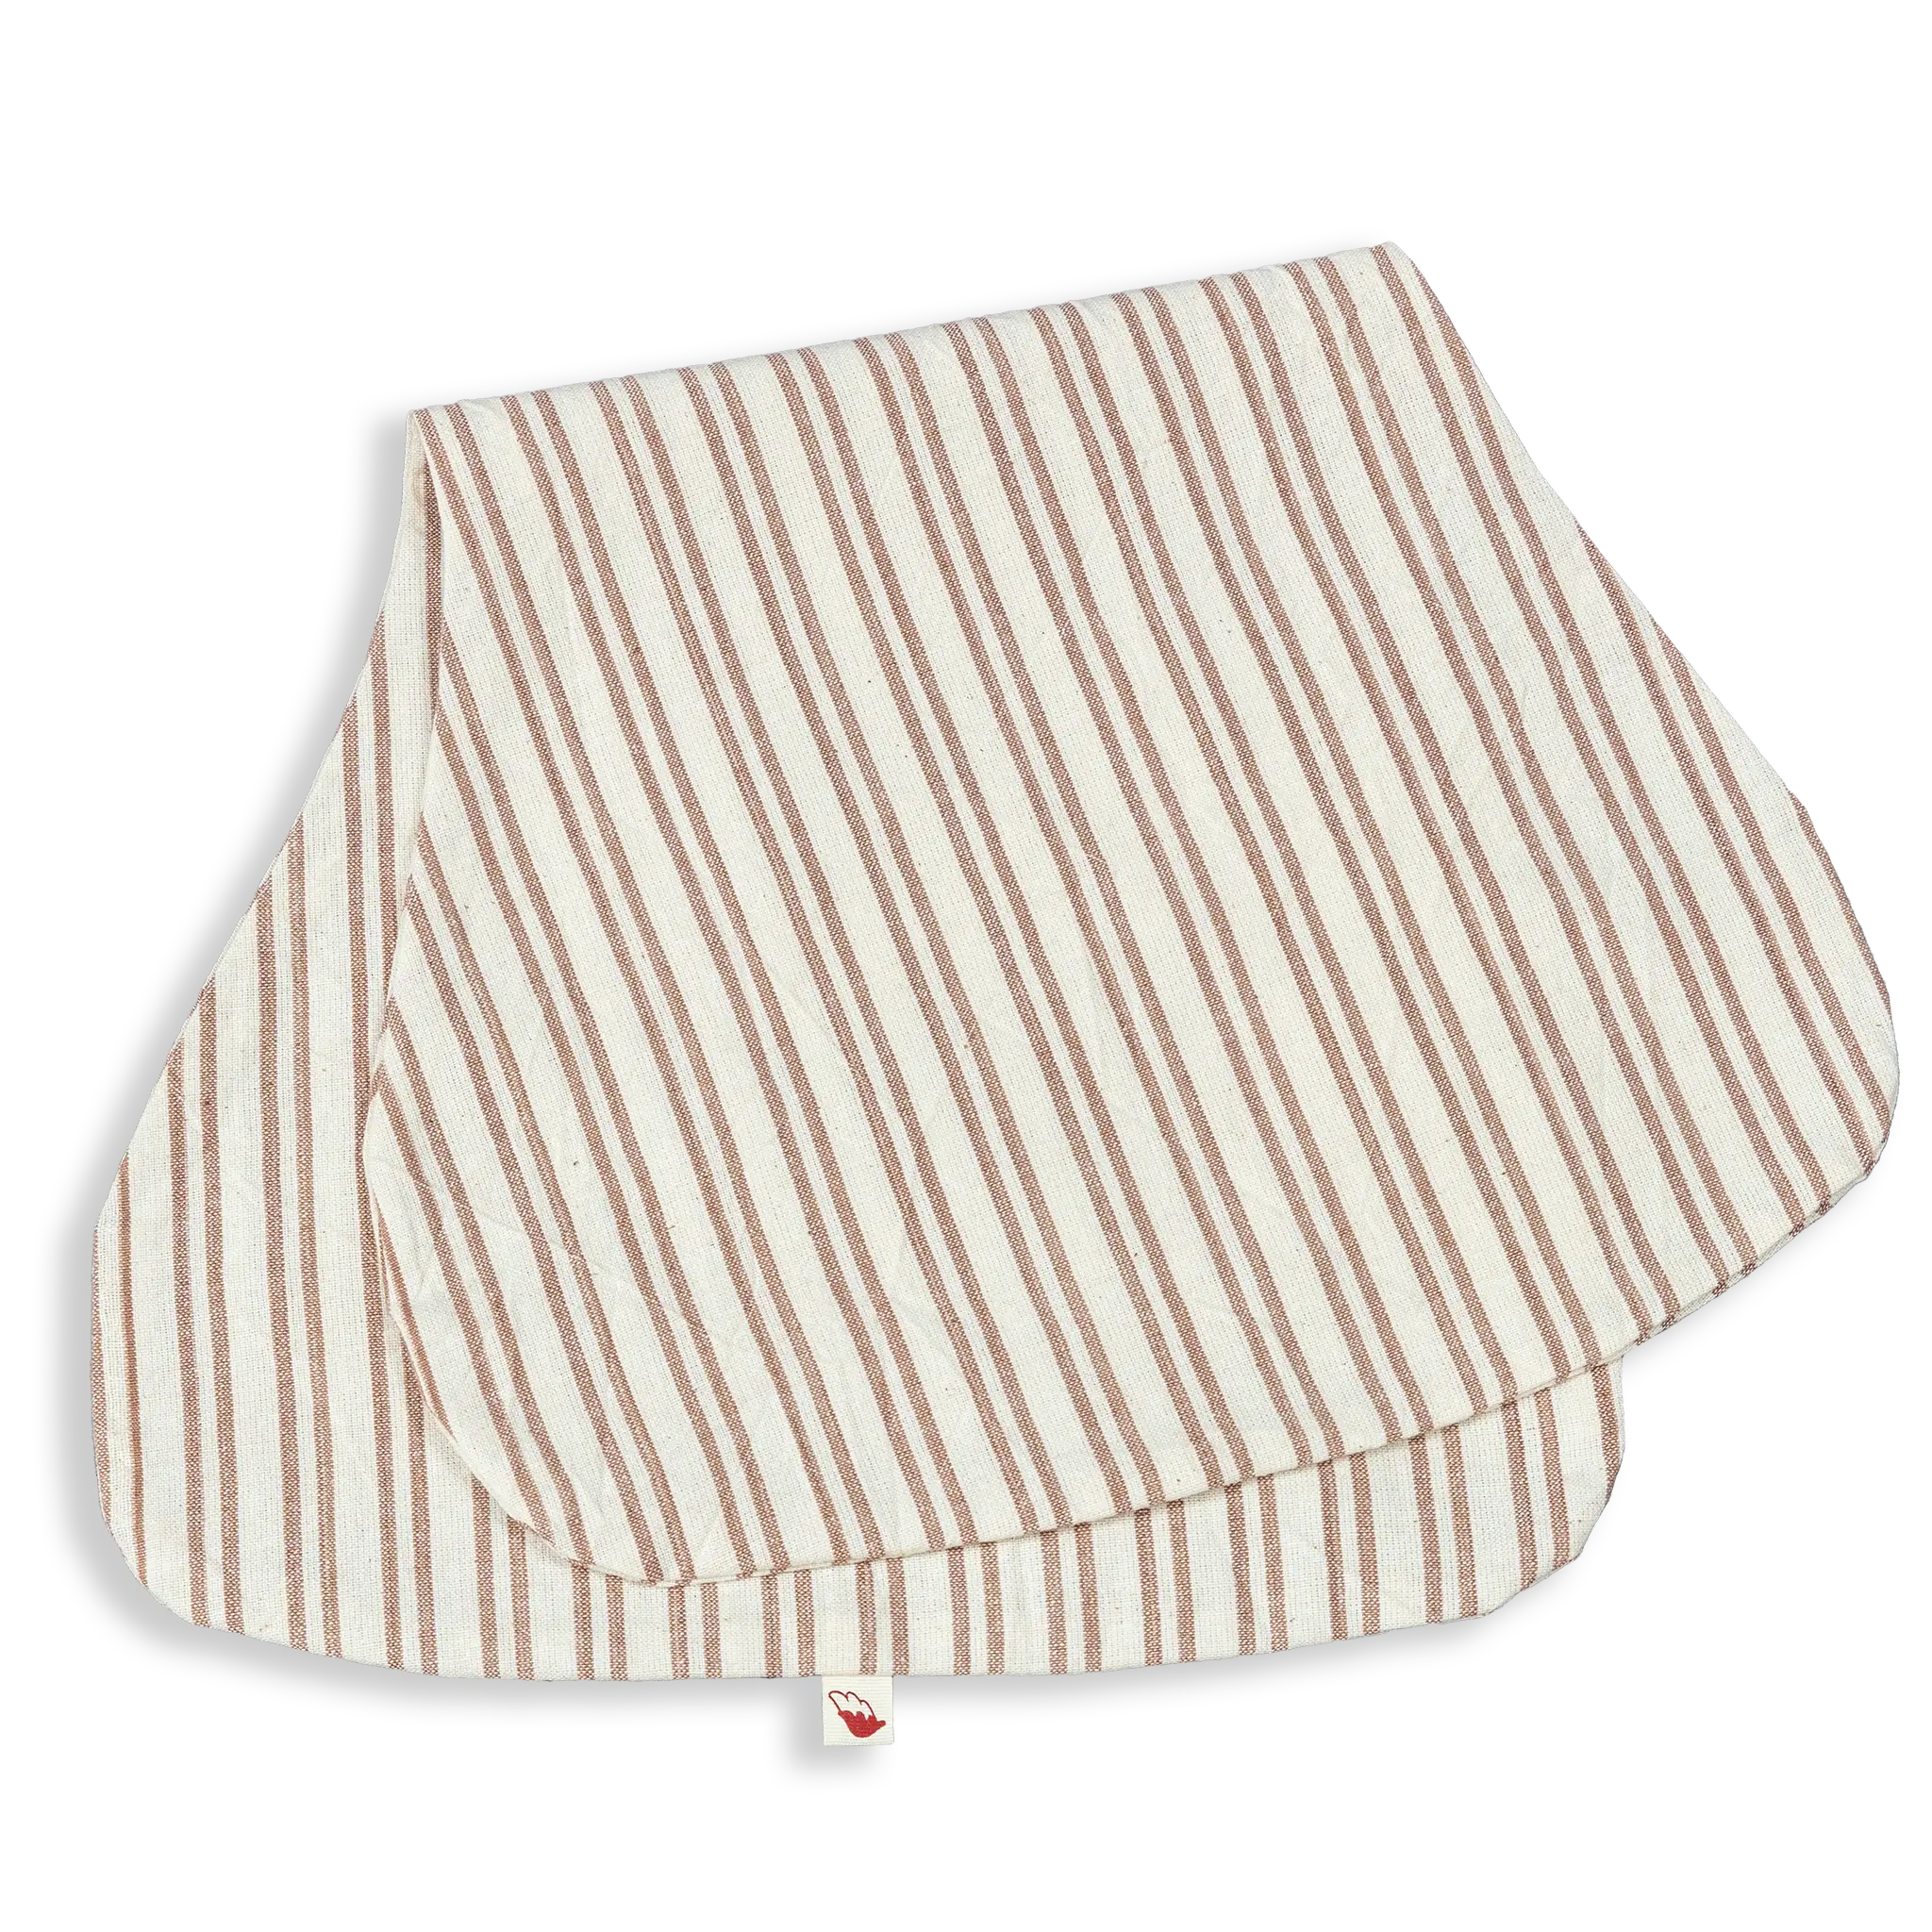 Soft cotton Baby Burp Cloths. Contoured to sit over the shoulder, the soft cotton stops it from slipping. Two layers of fabric make it very comfortable for your little baby to rest their head, and protect your clothing from little burping deposits!